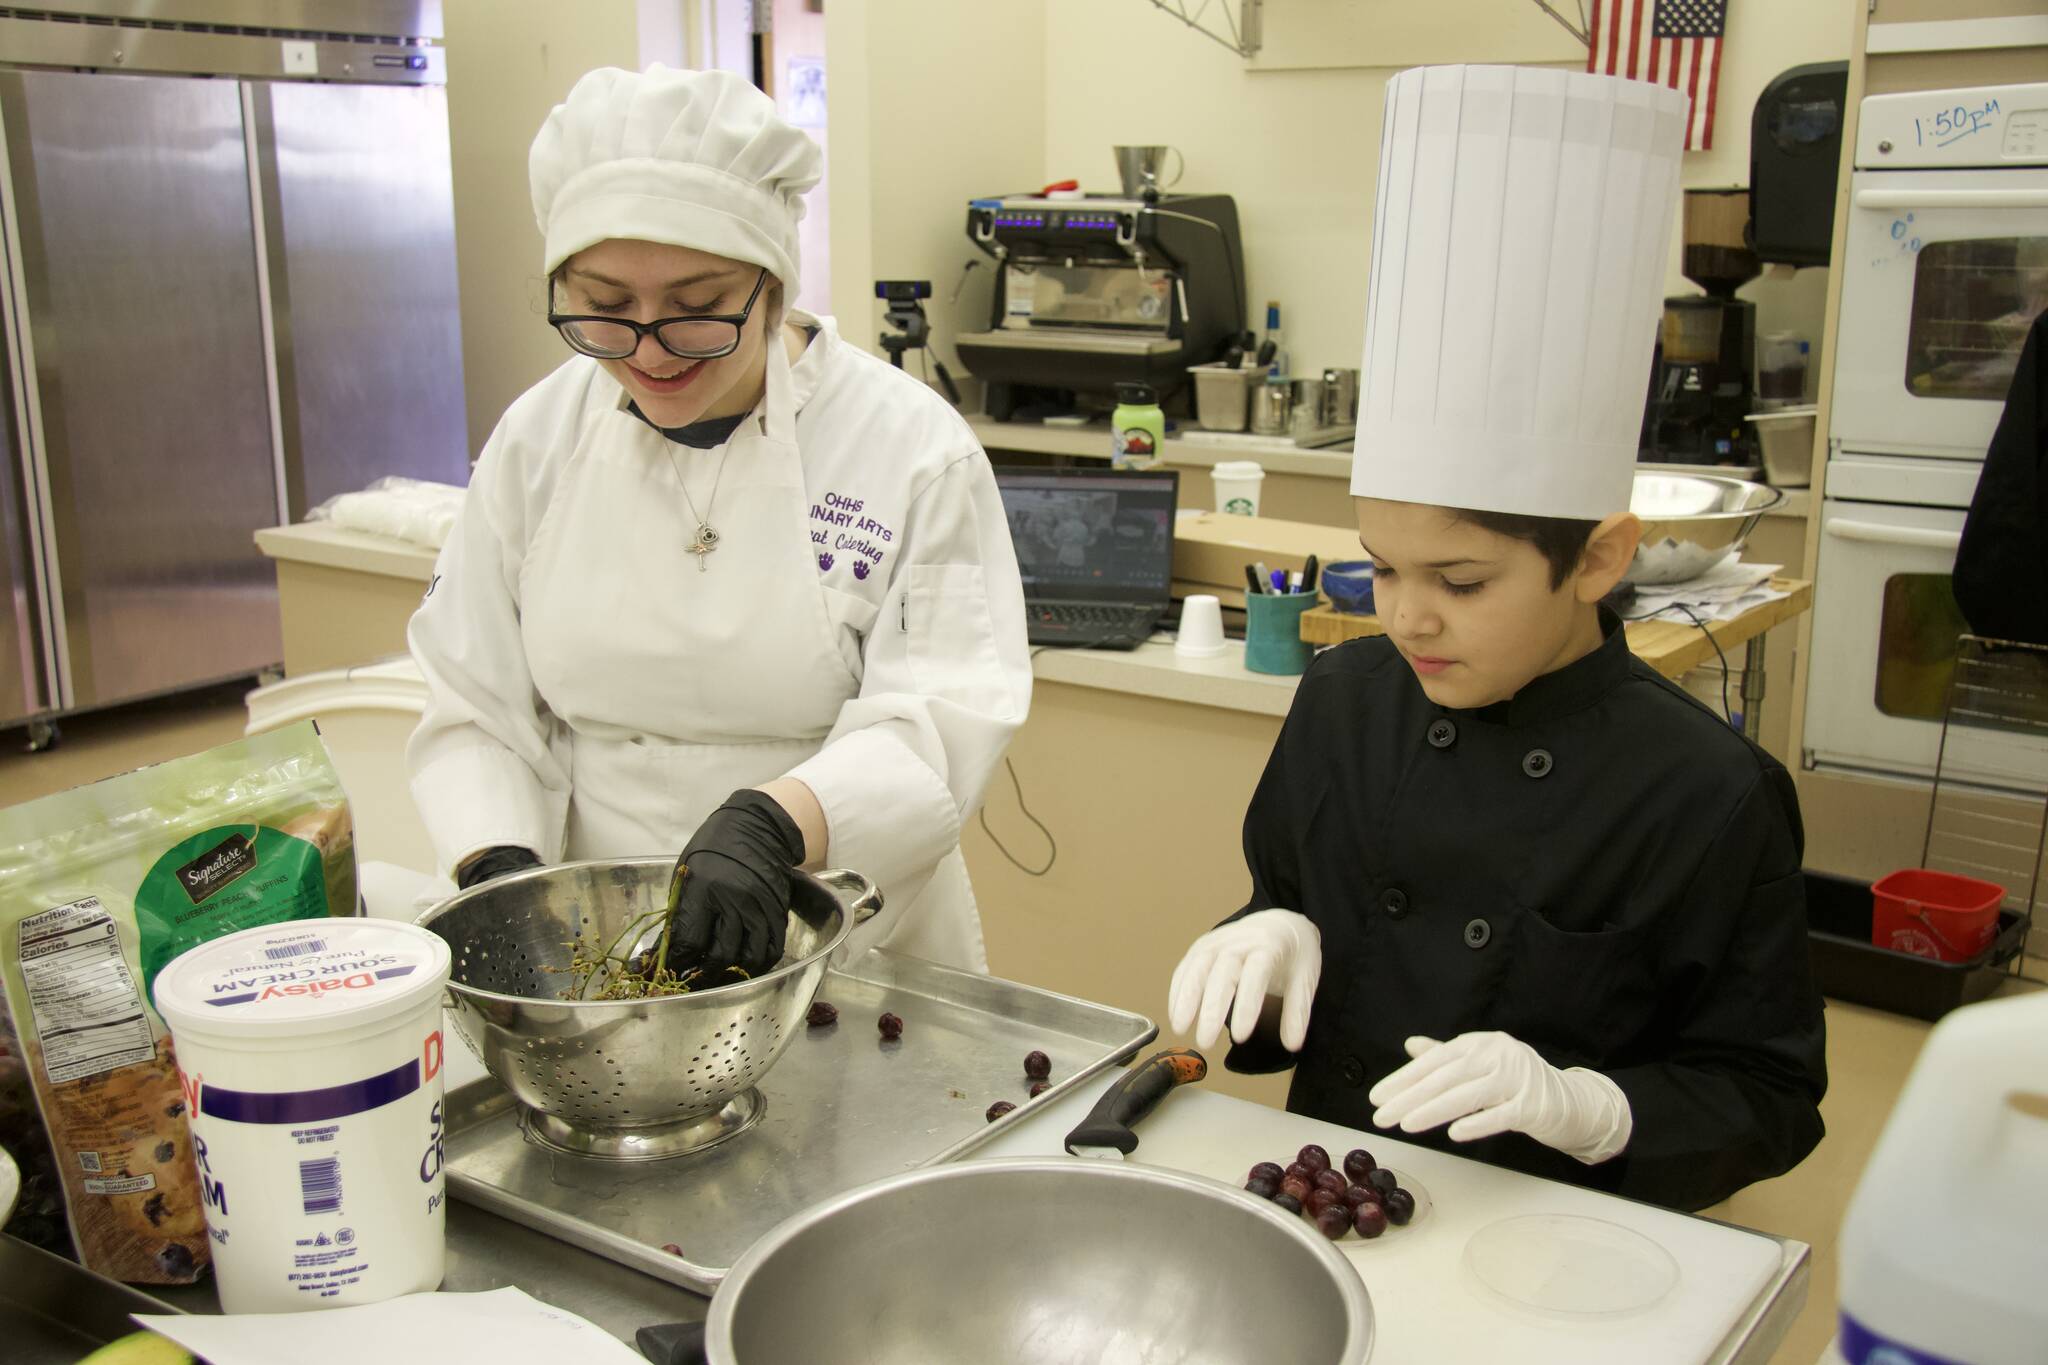 Kodi Ruiz (right) prepares grapes for a fruit salad. High school student Lily Erwin assists. (Photo by Rachel Rosen/Whidbey News-Times)